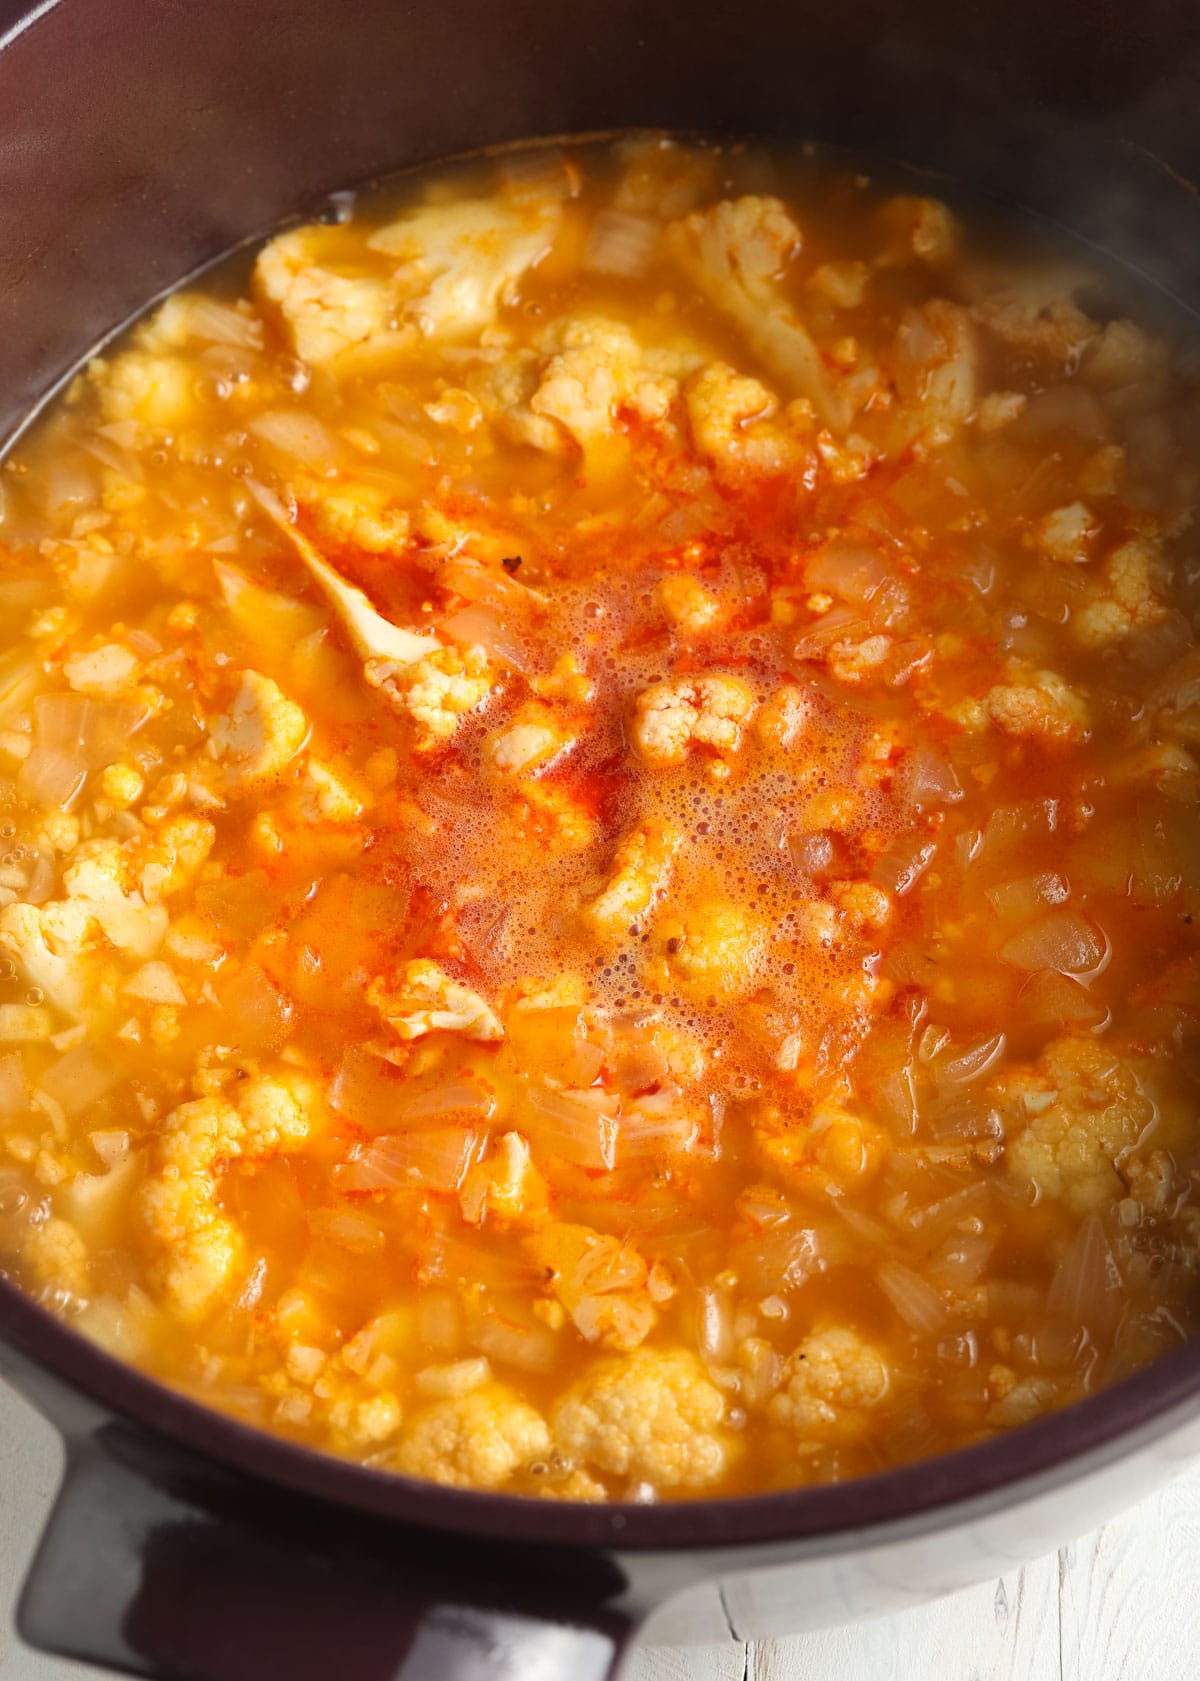 How to Make Low Carb Buffalo Cauliflower Soup Recipe #ASpicyPerspective #lowcarb #keto